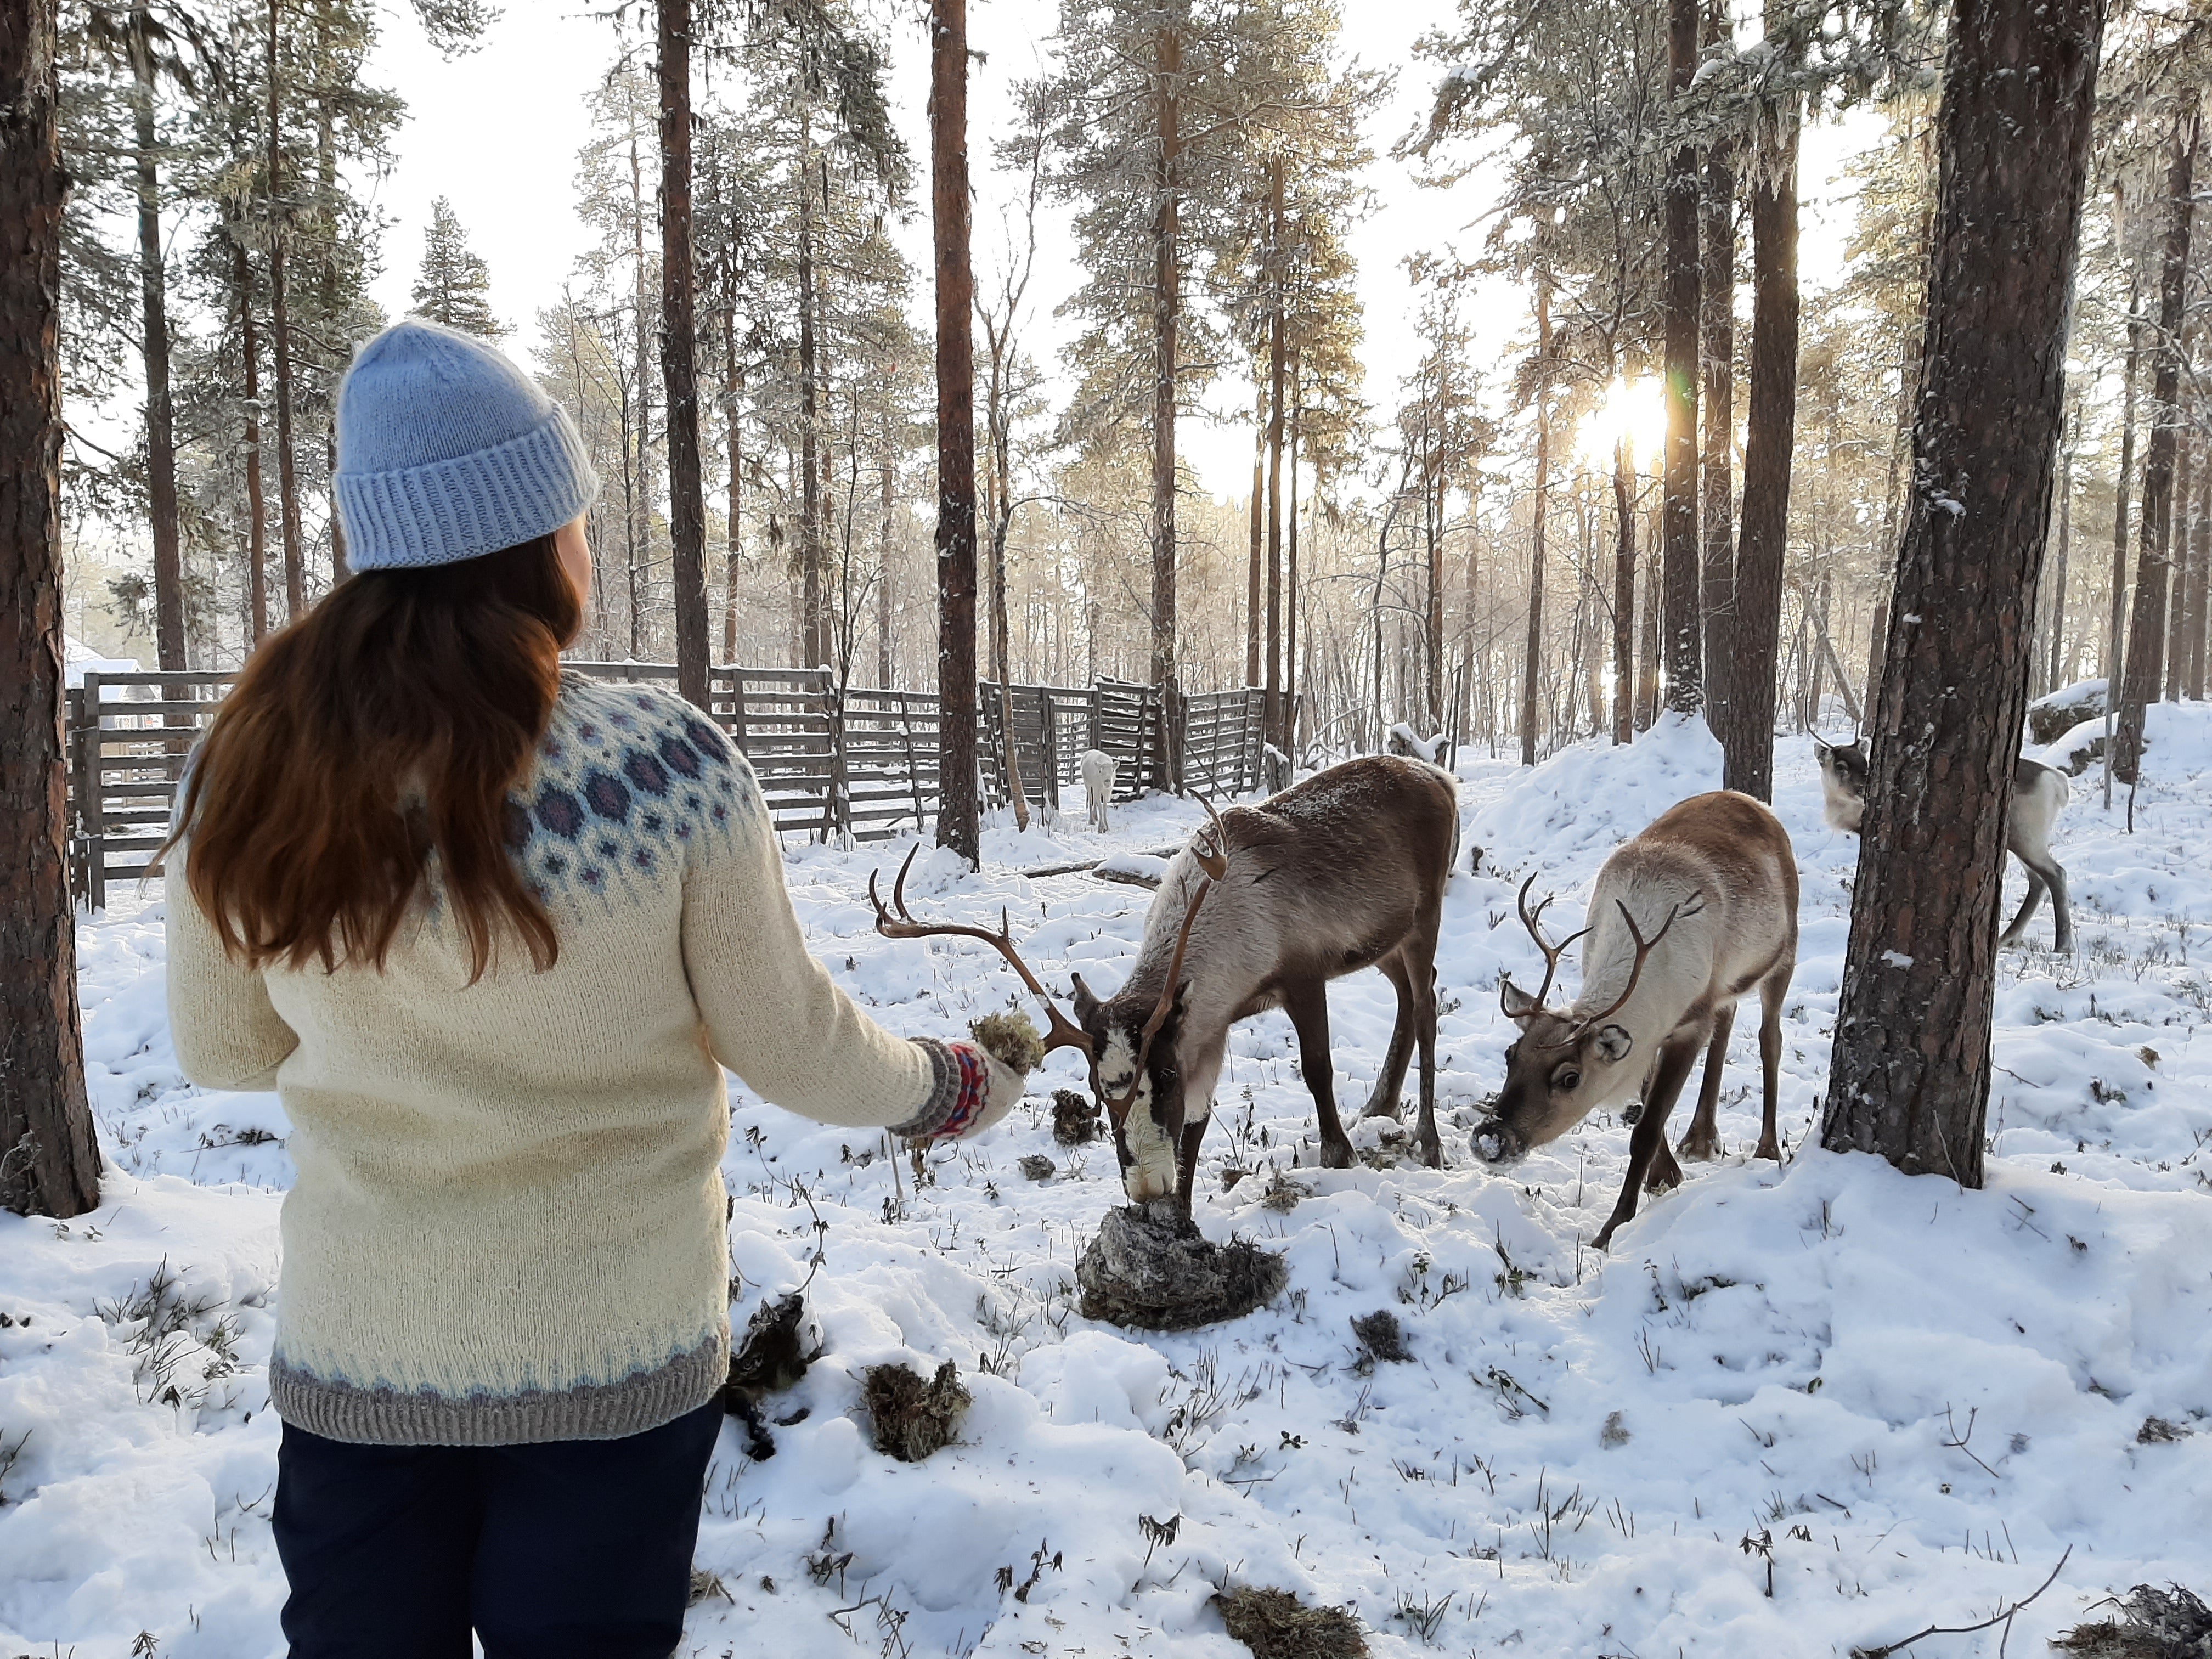 Visitors can visit the Angeli Reindeer Farm